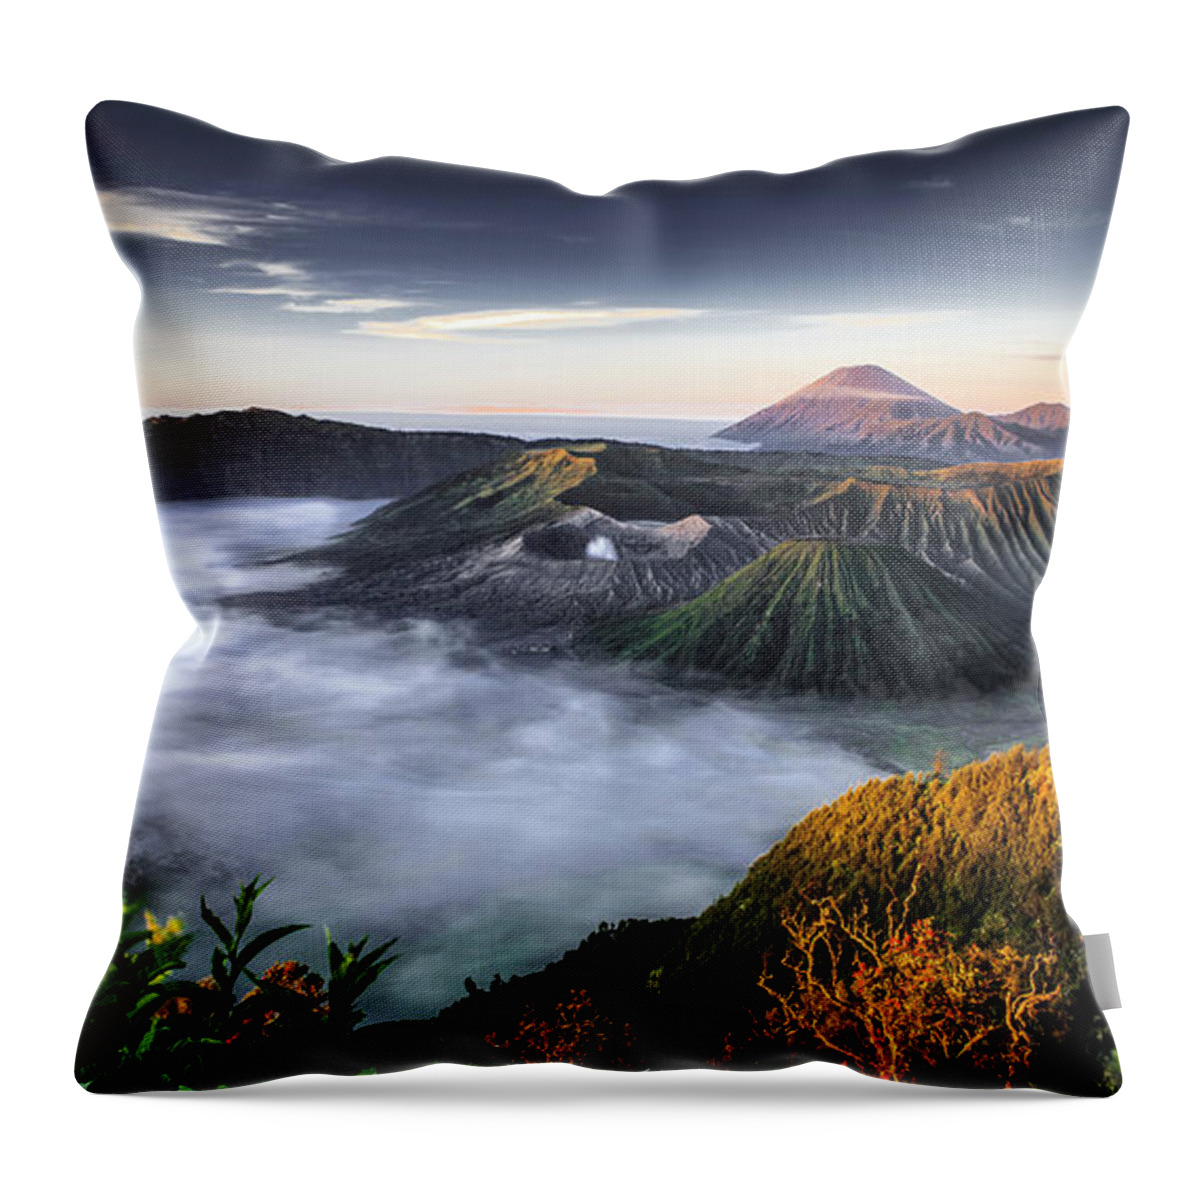 Scenics Throw Pillow featuring the photograph Indonesia Mount Bromo by Frederic Huber Photography